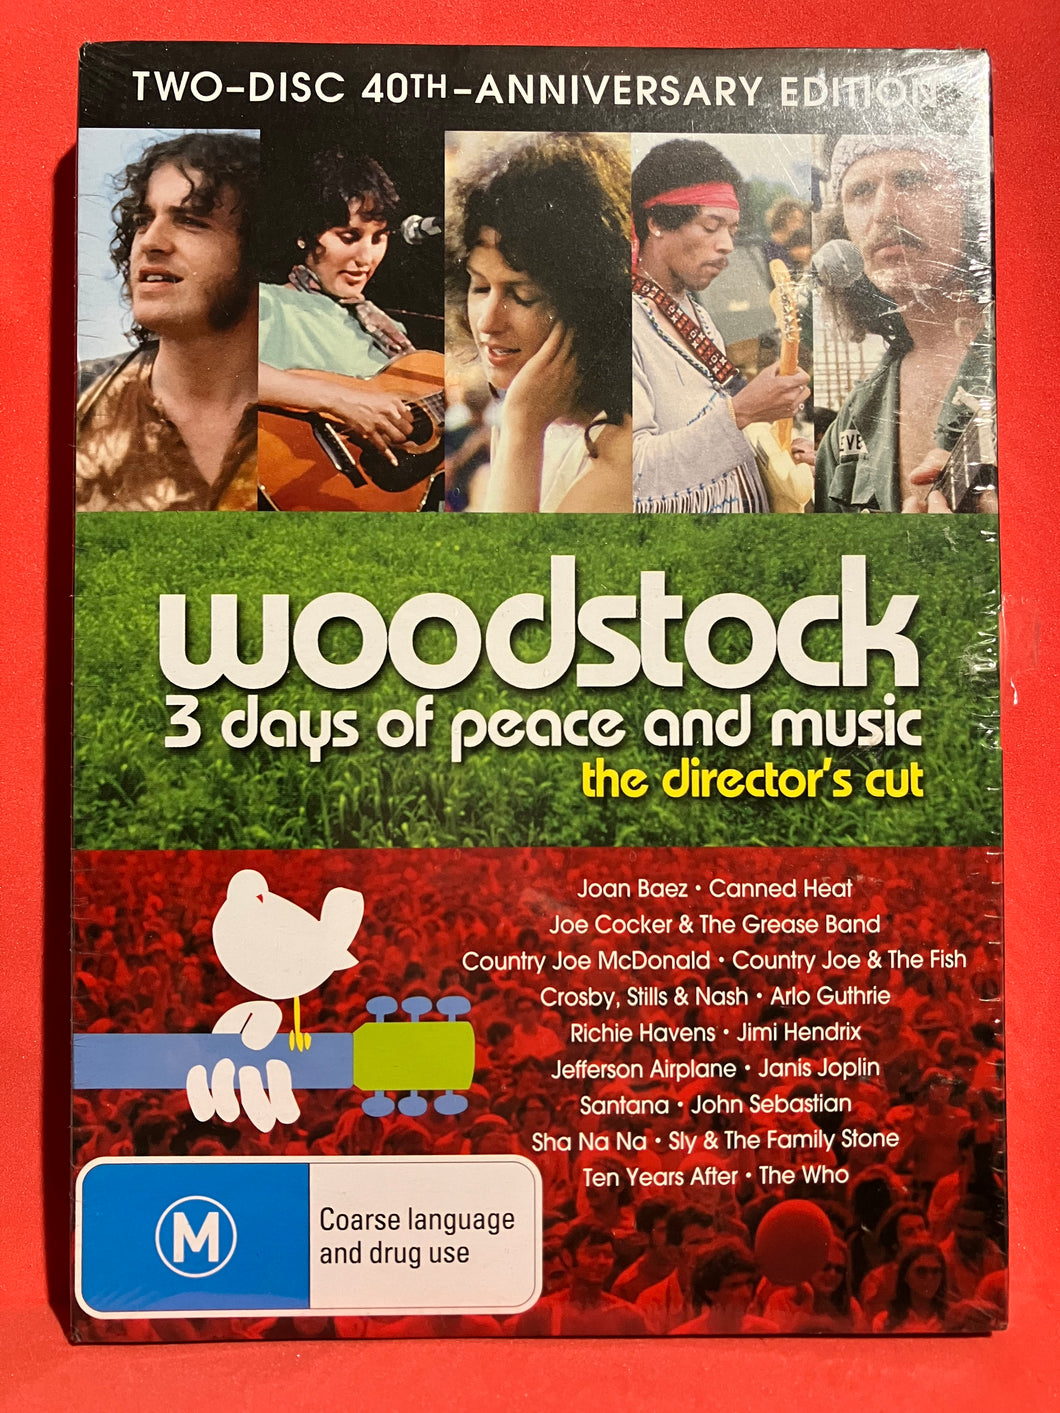 WOODSTOCK - 3 DAYS OF PEACE AND MUSIC THE DIRECTOR'S CUT - DVD (SEALED)